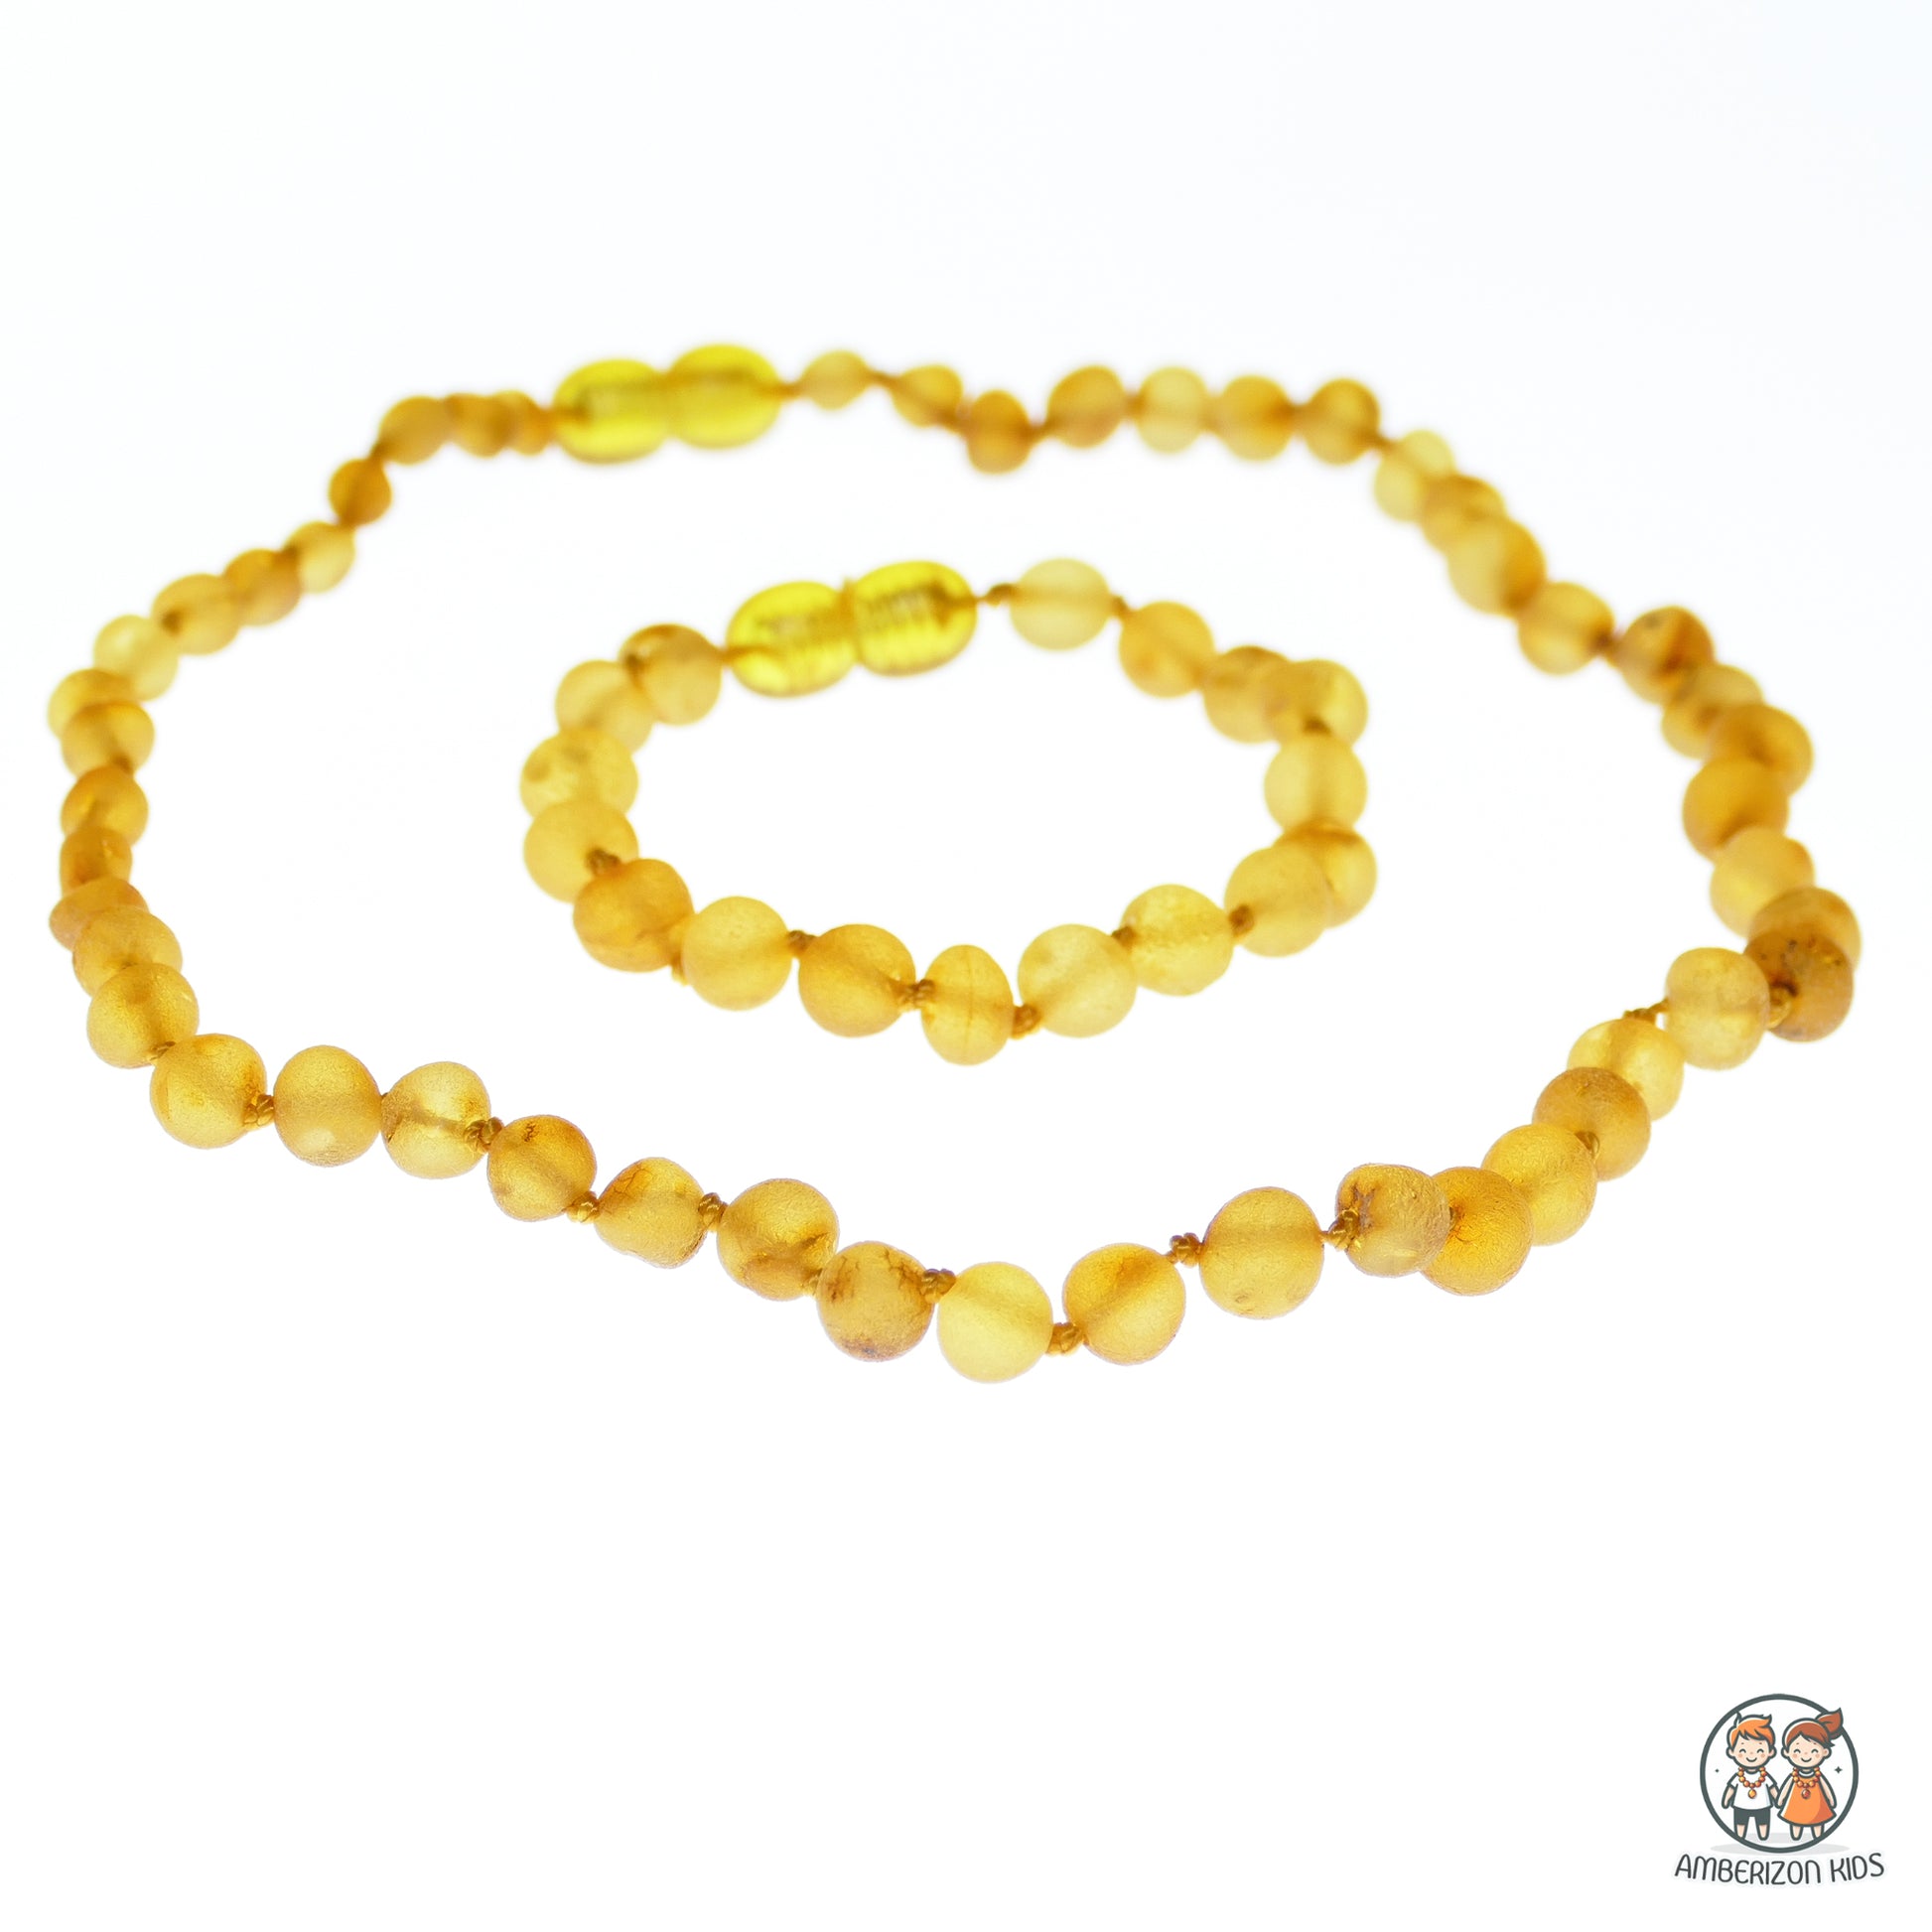 Matching Baby raw amber jewelry set - Honey sea amber color - Baby bracelet + baby necklace